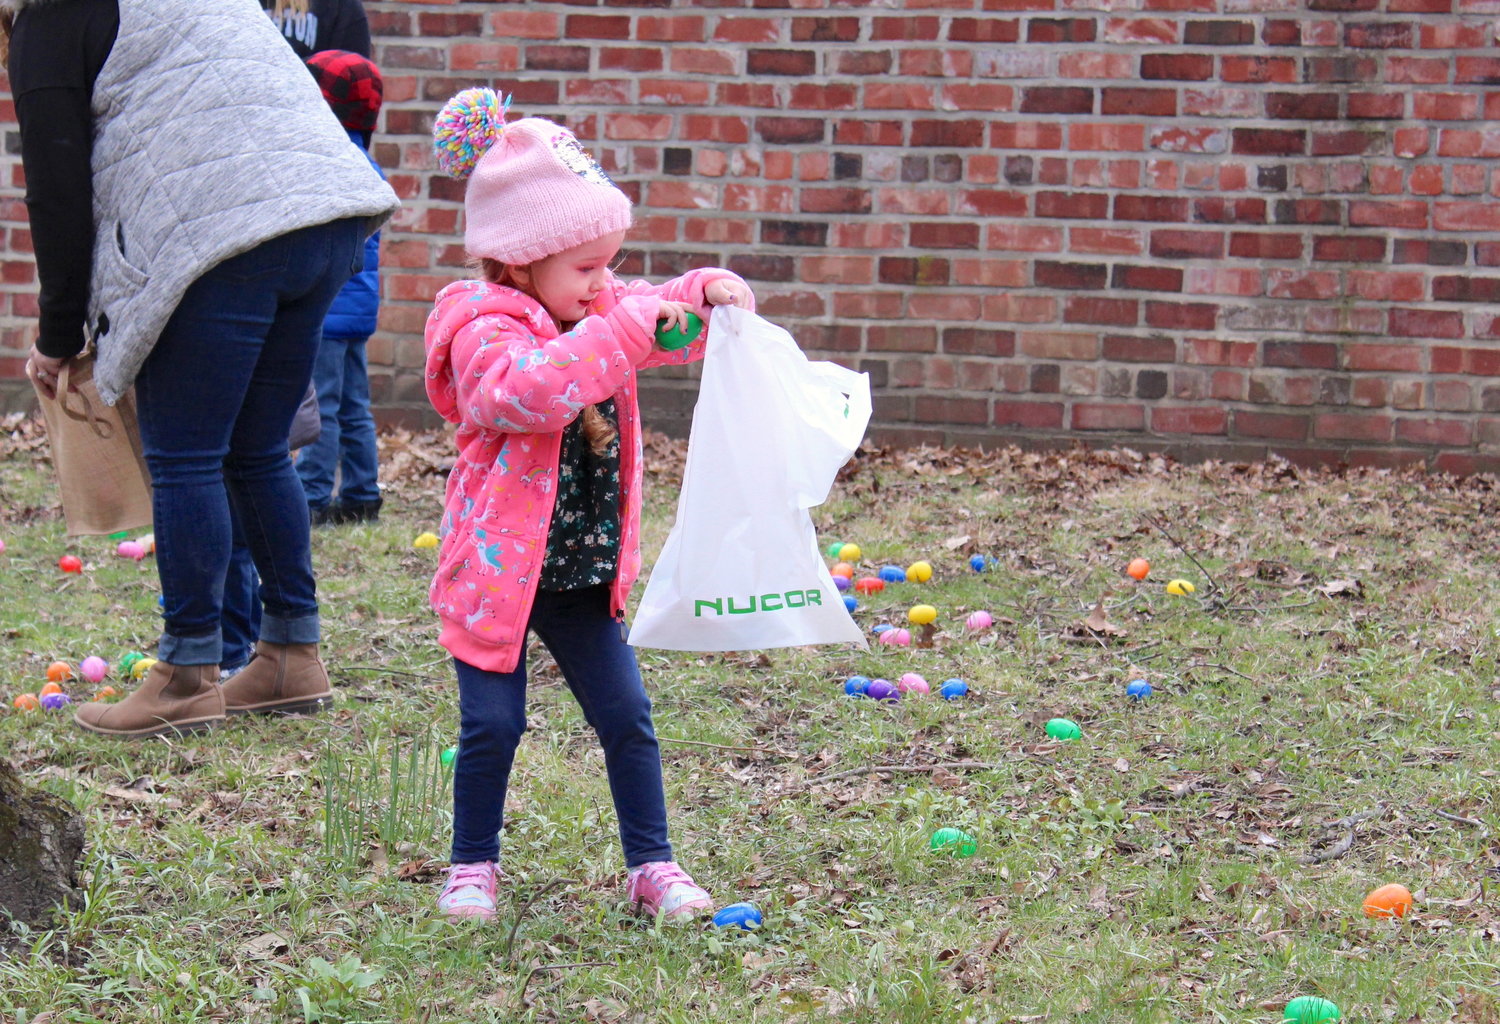 Willow Koontz, 4, bags another Easter egg Saturday at the General Lew Wallace Study.